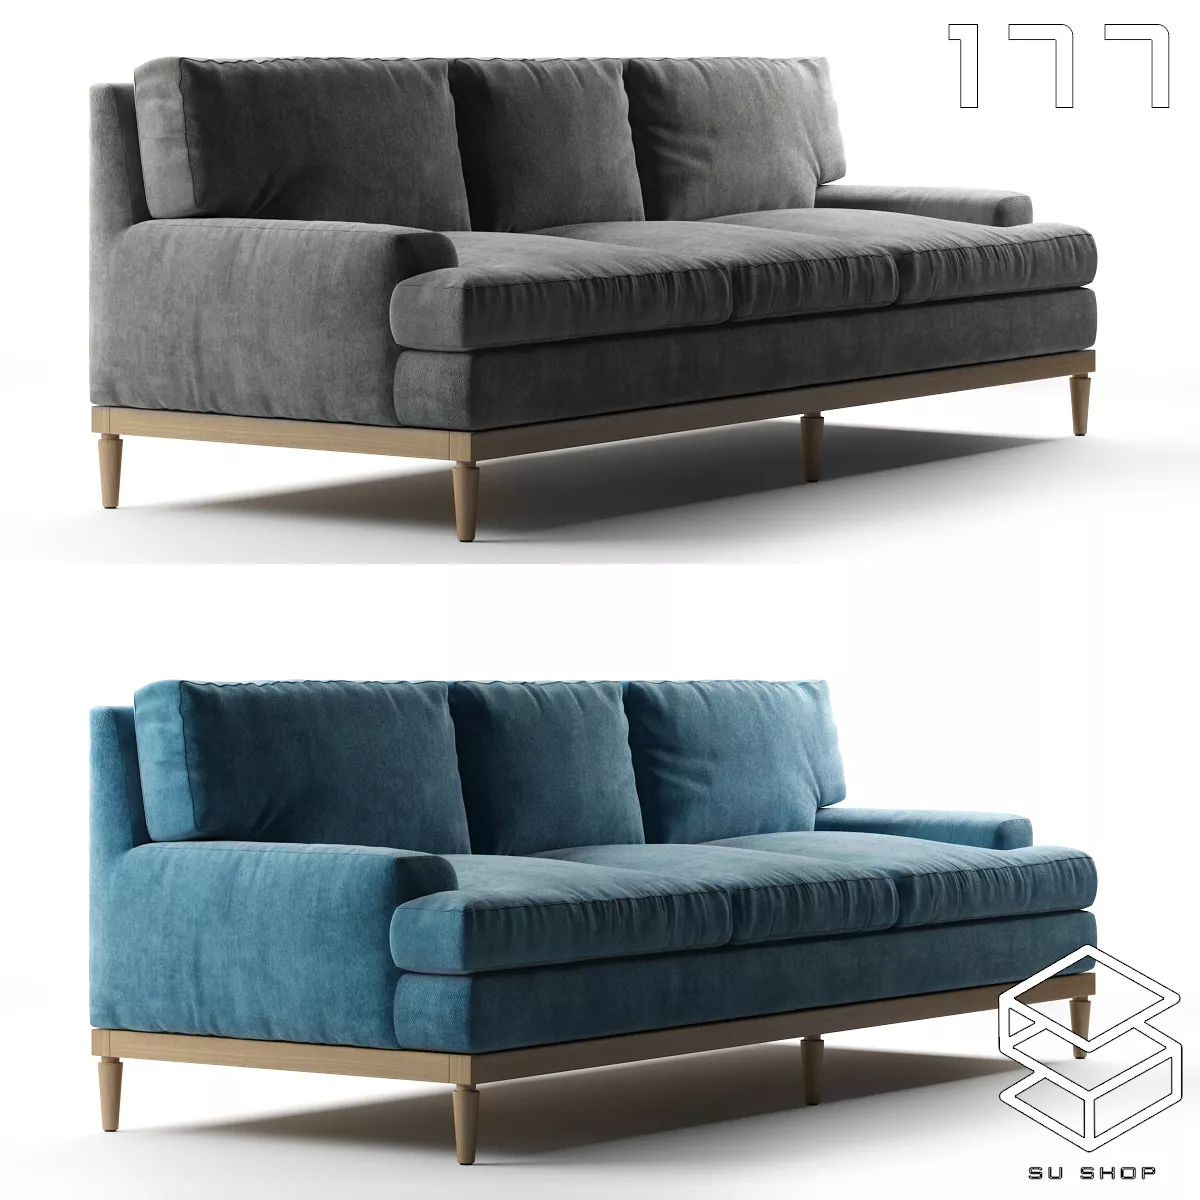 MODERN SOFA - SKETCHUP 3D MODEL - VRAY OR ENSCAPE - ID13471